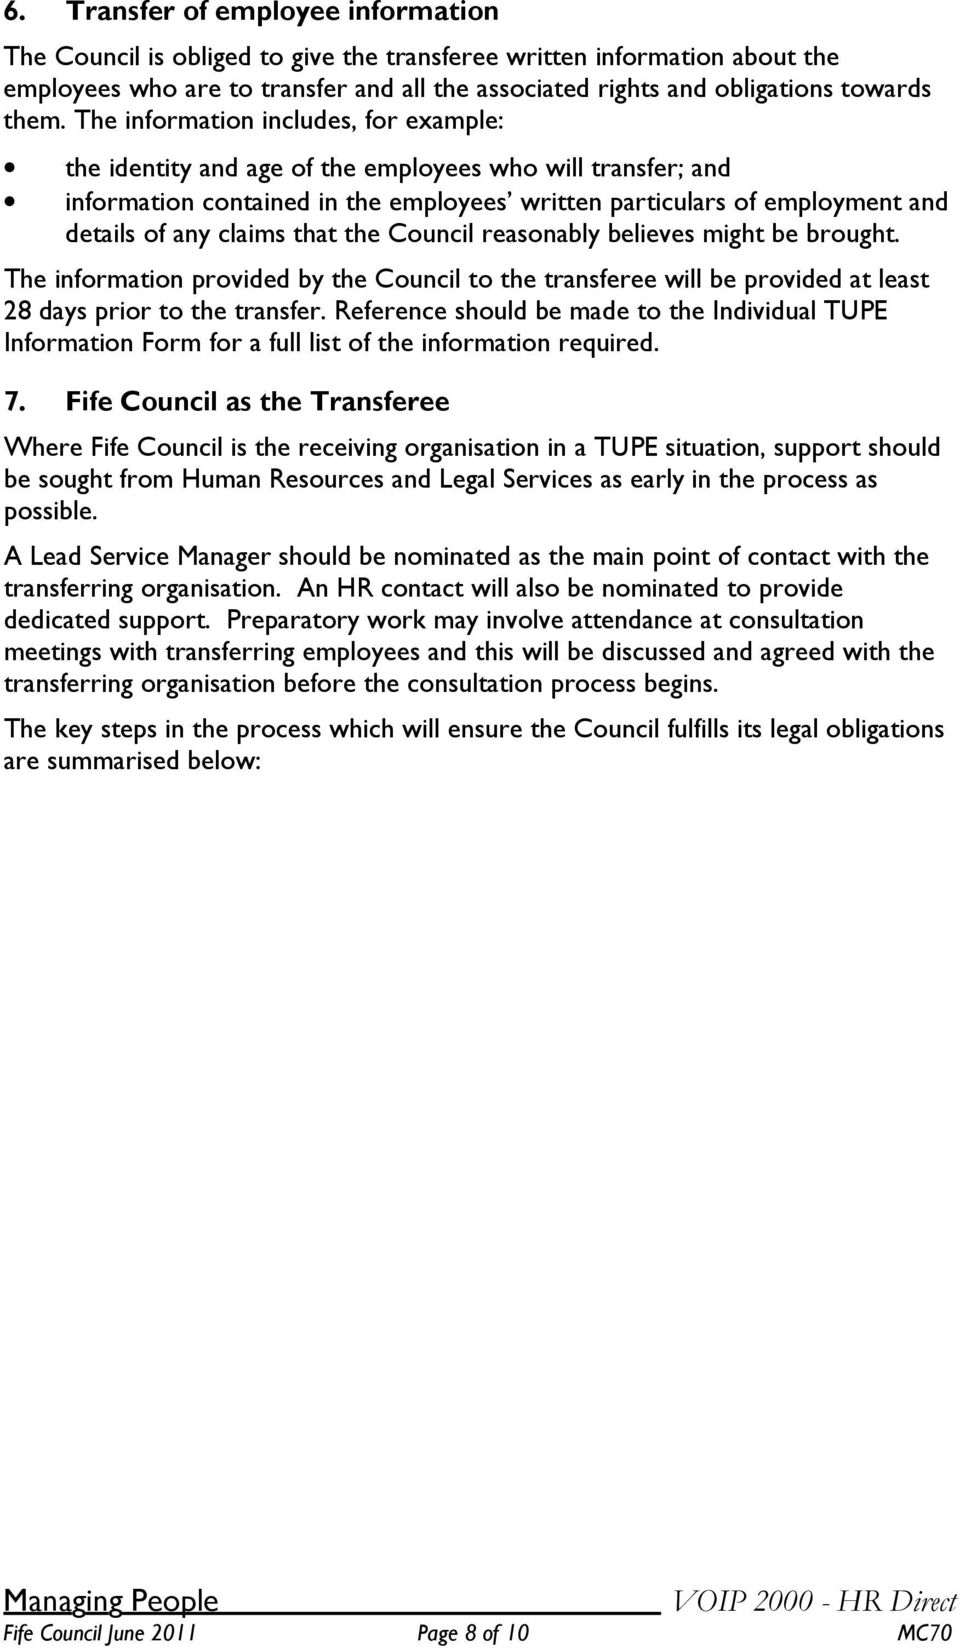 claims that the Council reasonably believes might be brought. The information provided by the Council to the transferee will be provided at least 28 days prior to the transfer.